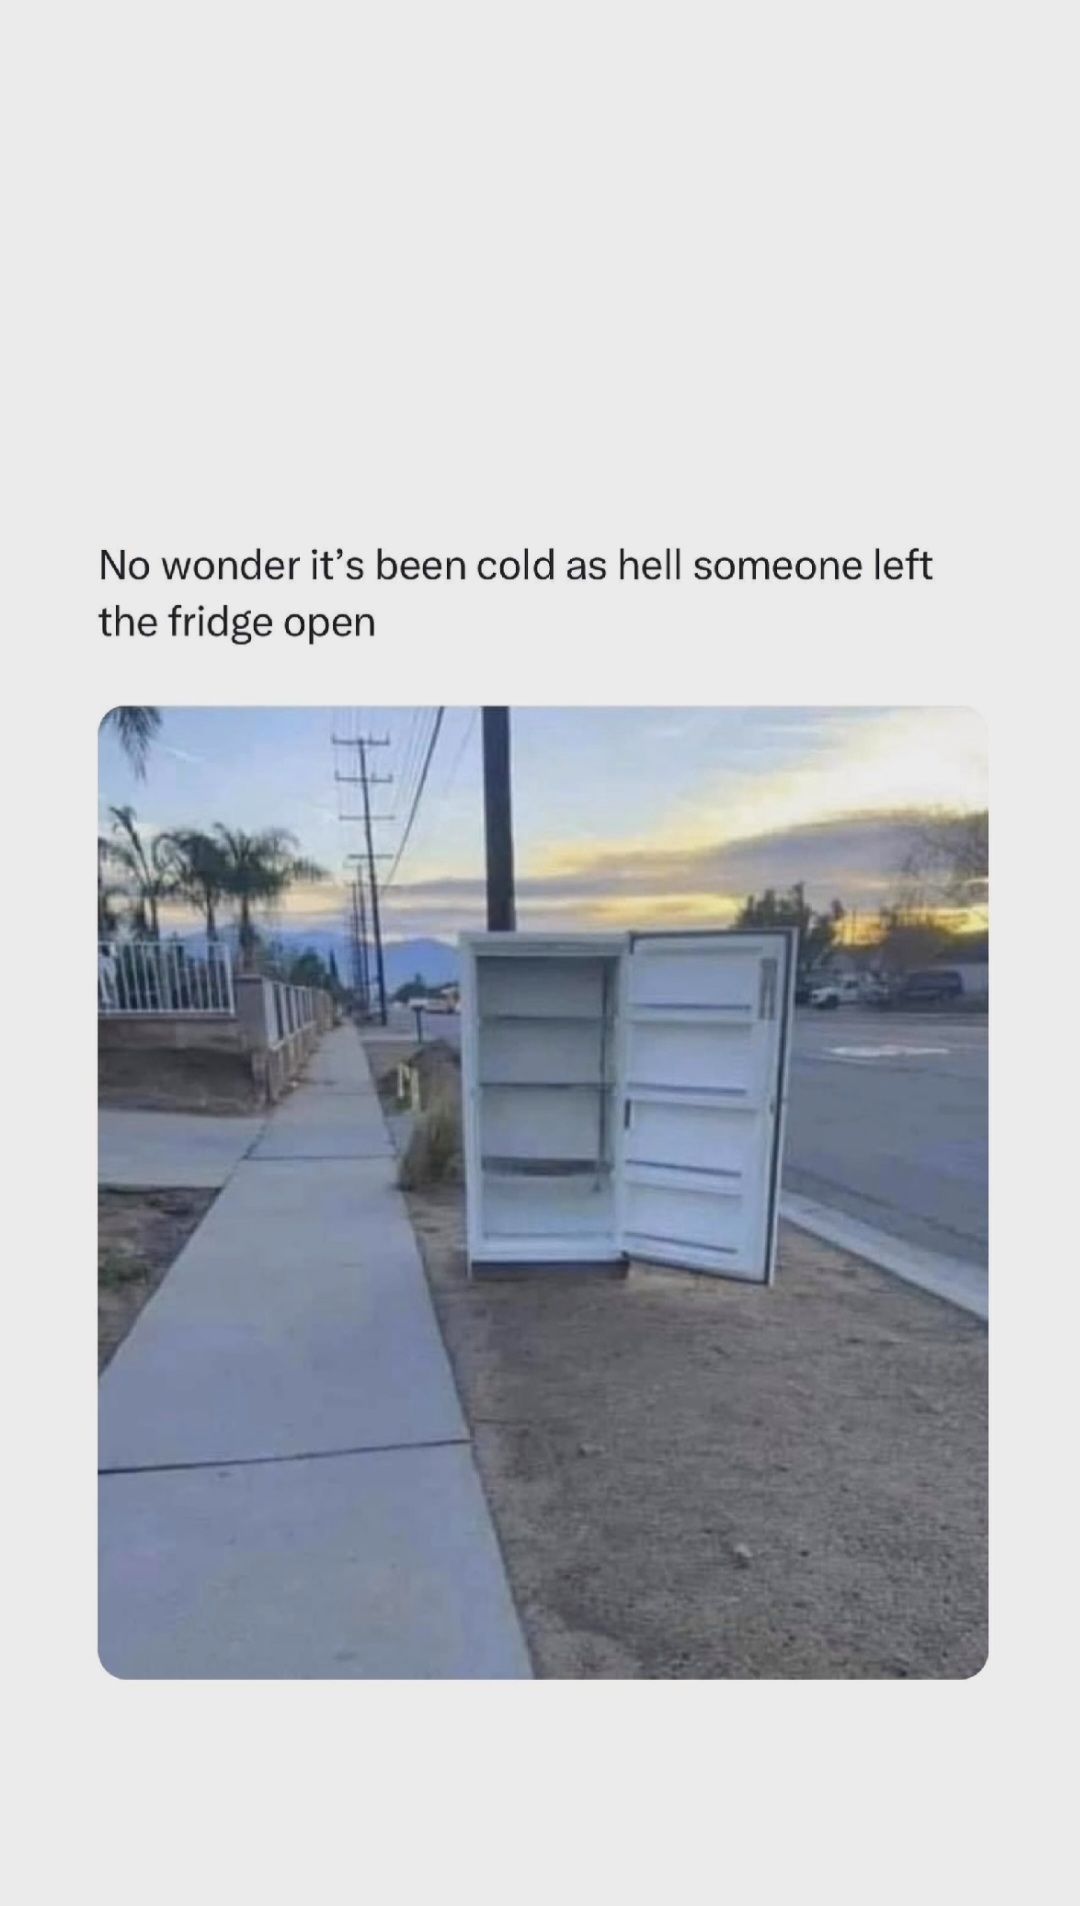 No wonder it's been cold as hell someone left
the fridge open